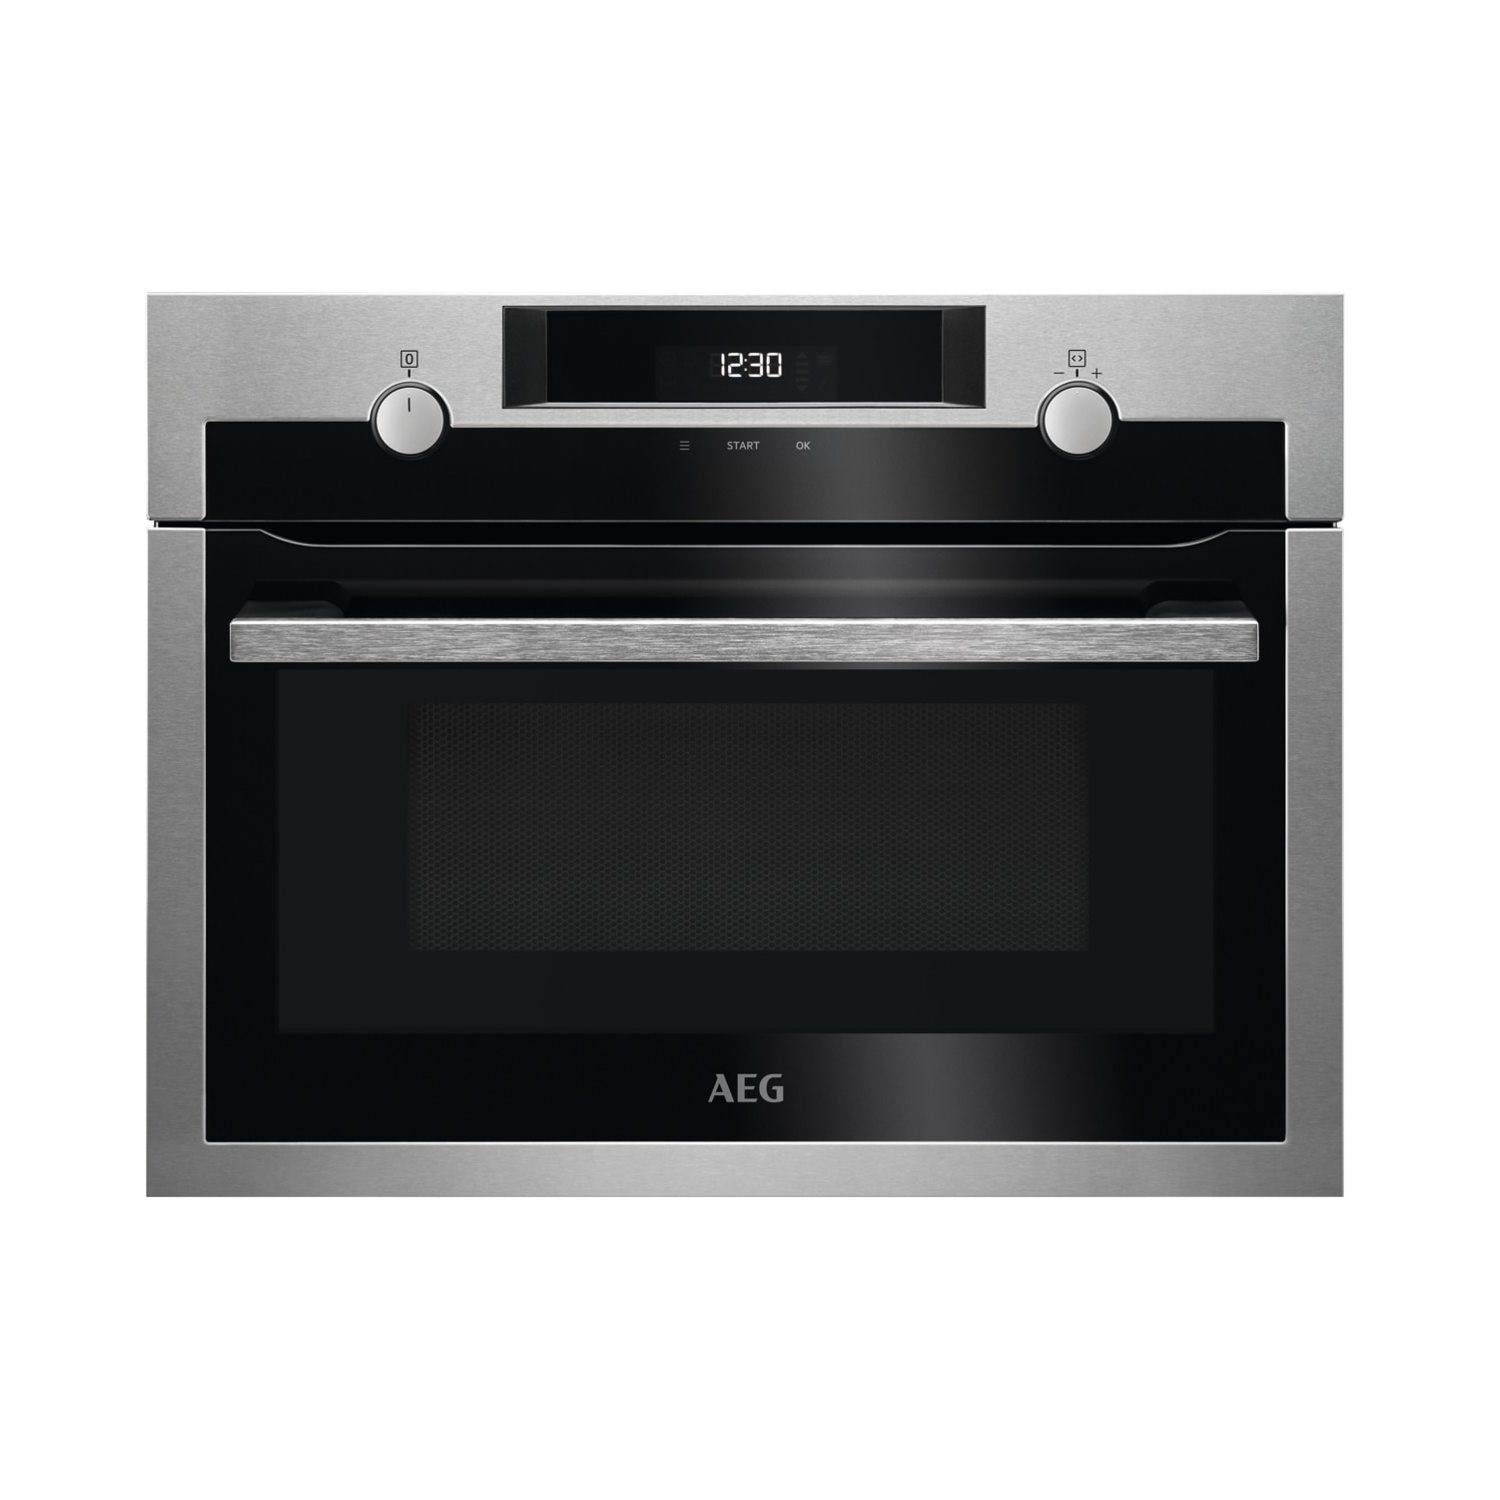 Refurbished AEG KME525800M Built In 42L 1000W Microwave & Grill Stainless Steel